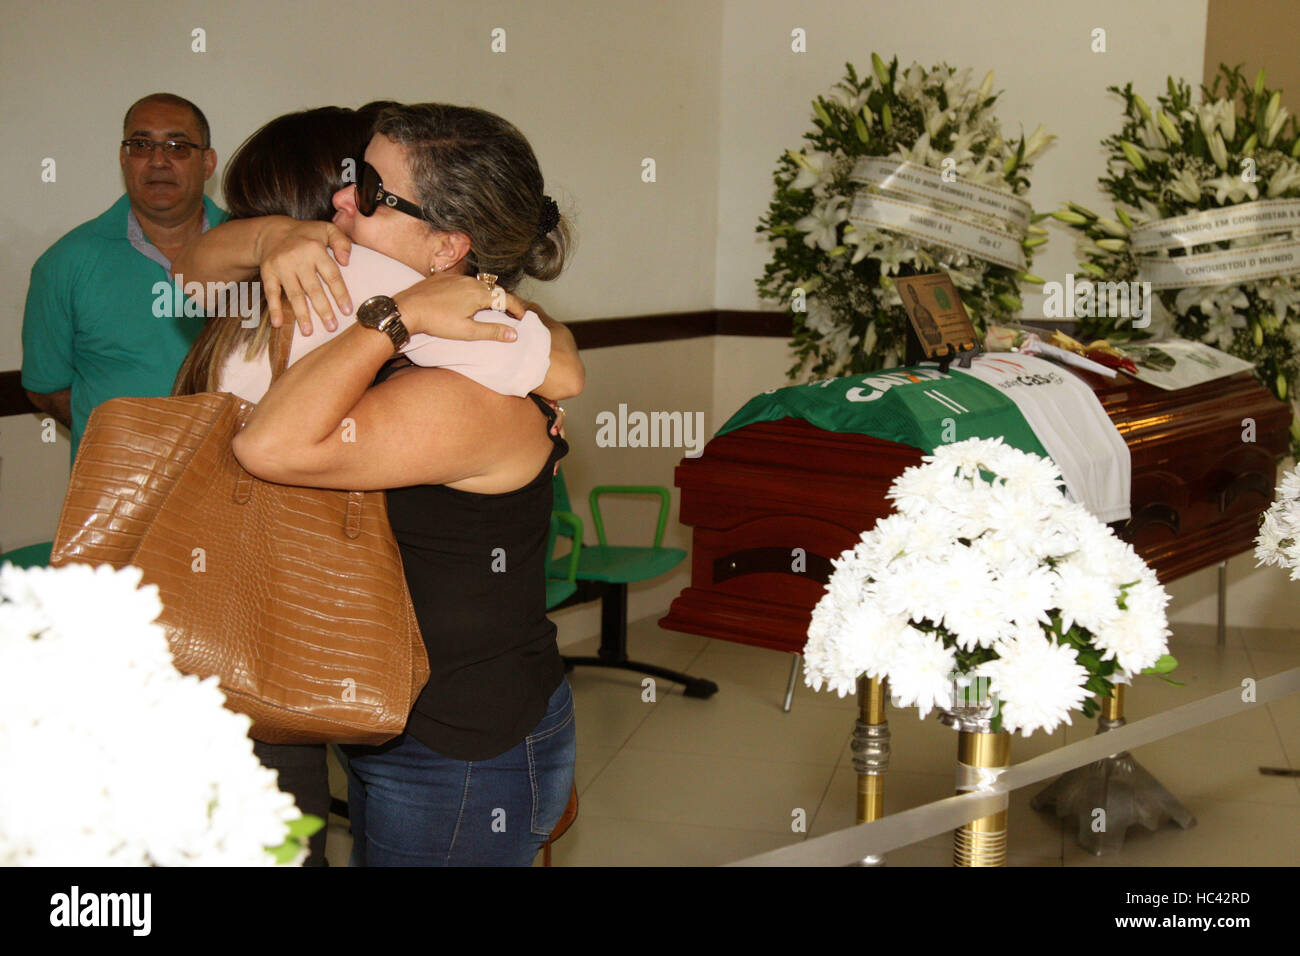 SALVADOR, BA - 04.12.2016: VELORIO DE ANANIAS JOGADOR CHAPECO - Eloi Castro Monteiro Ananias, player Chapecoense and killed in the plane crash. Veiled in the cemetery Garden Saldades in Salvador, where he received tributes from friends and family, fans, former players and directors of Bahia, which he joined at 14 years of age on the basis of division. He died at 27 and leaves the widow, Barbara Monteiro, and 5 year old son. Born in Sao Luis do Maranhao, and based in Salvador, where he married, had family and professional football career. His body will be cremated this Monday, 05/12/2016 at Cre Stock Photo